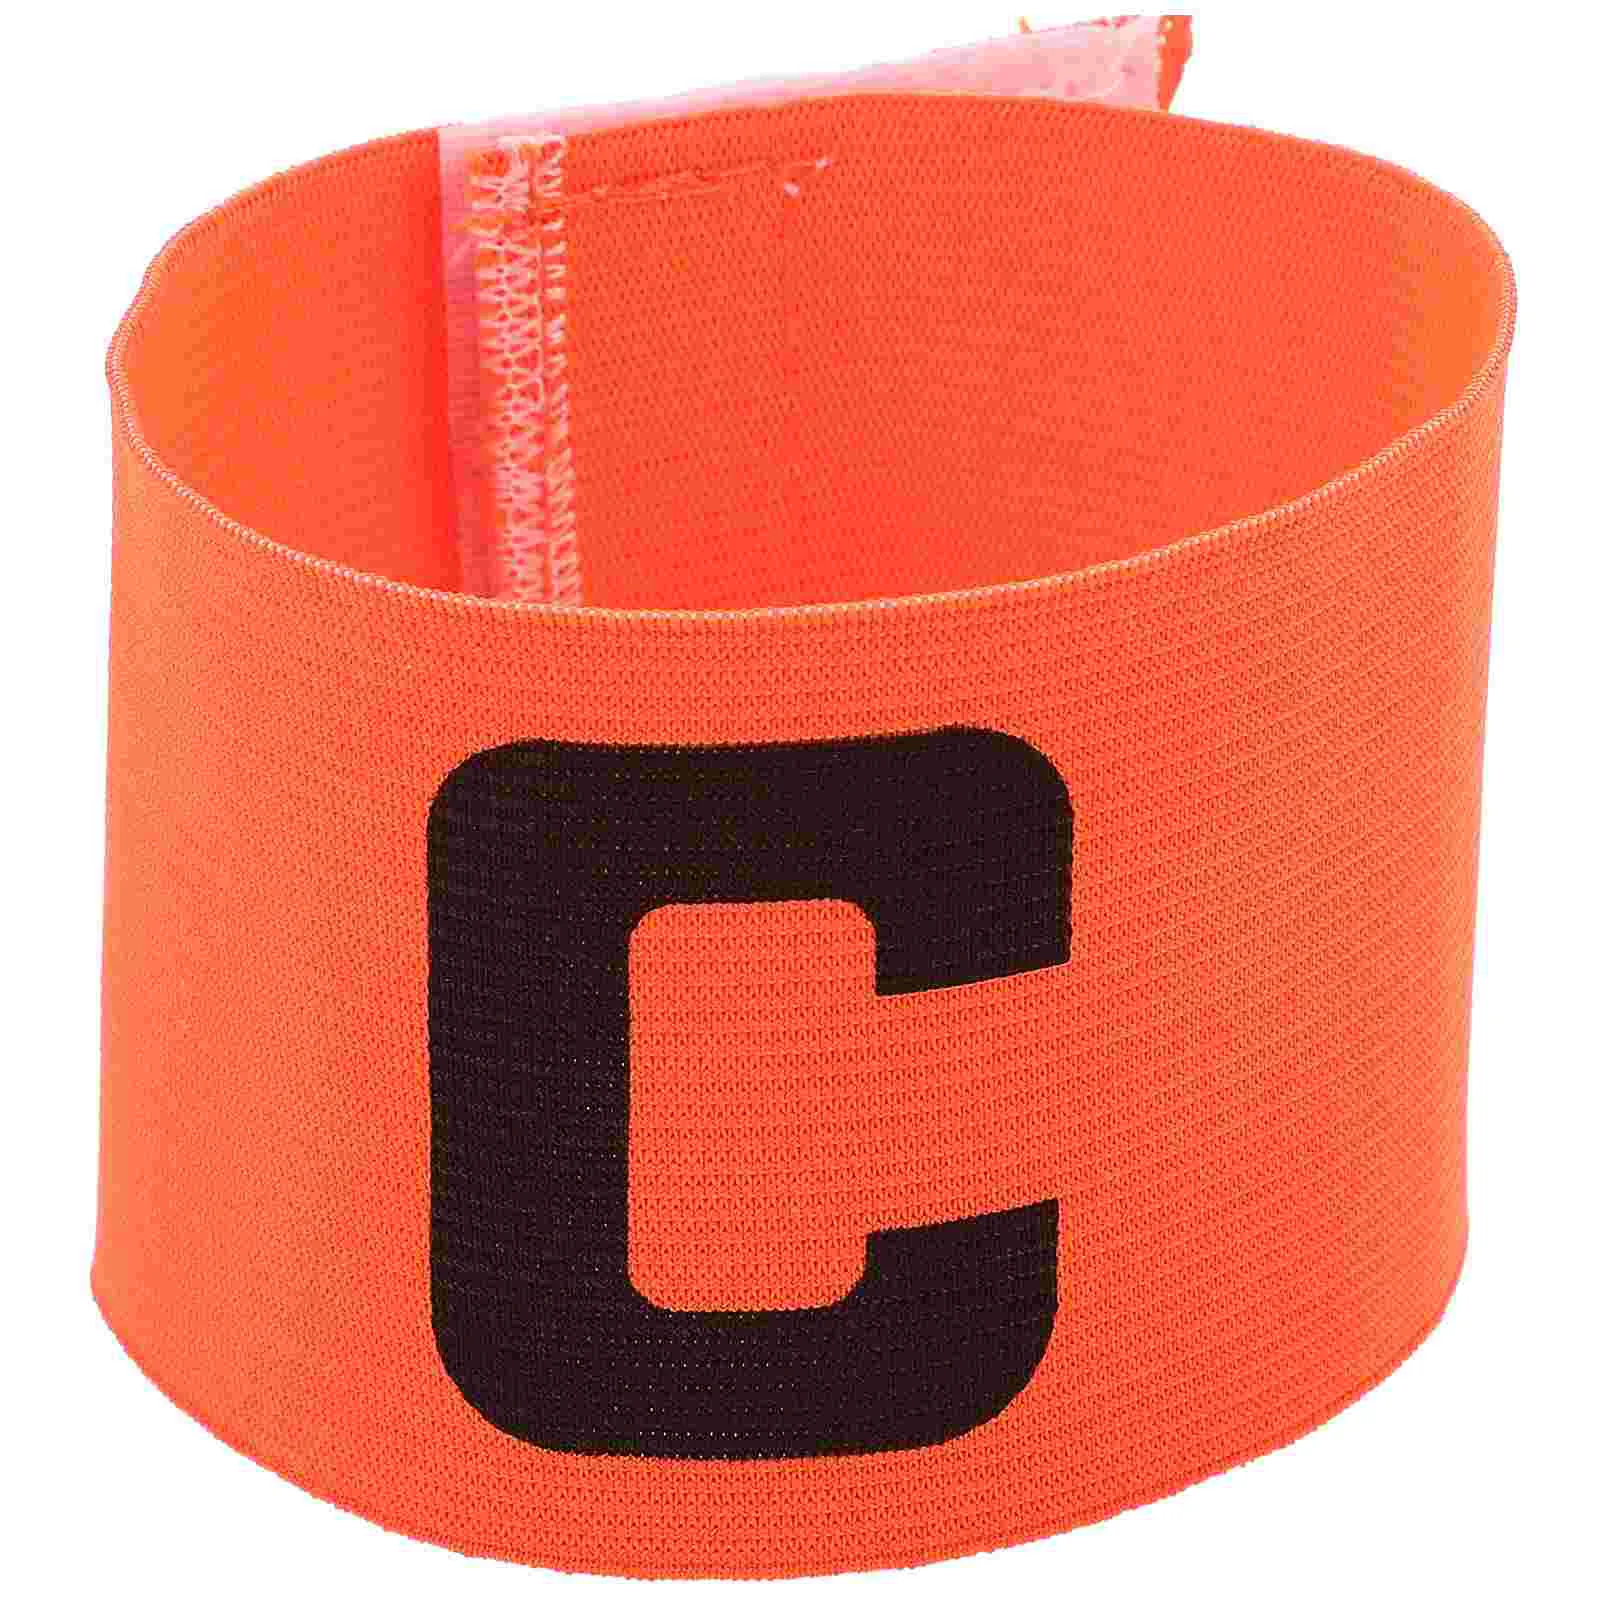 

Captain Armband Soccer Bands Arm Football Adult Captains Youth Armbands Softballadjustable Band Exercise Fitness Accessories